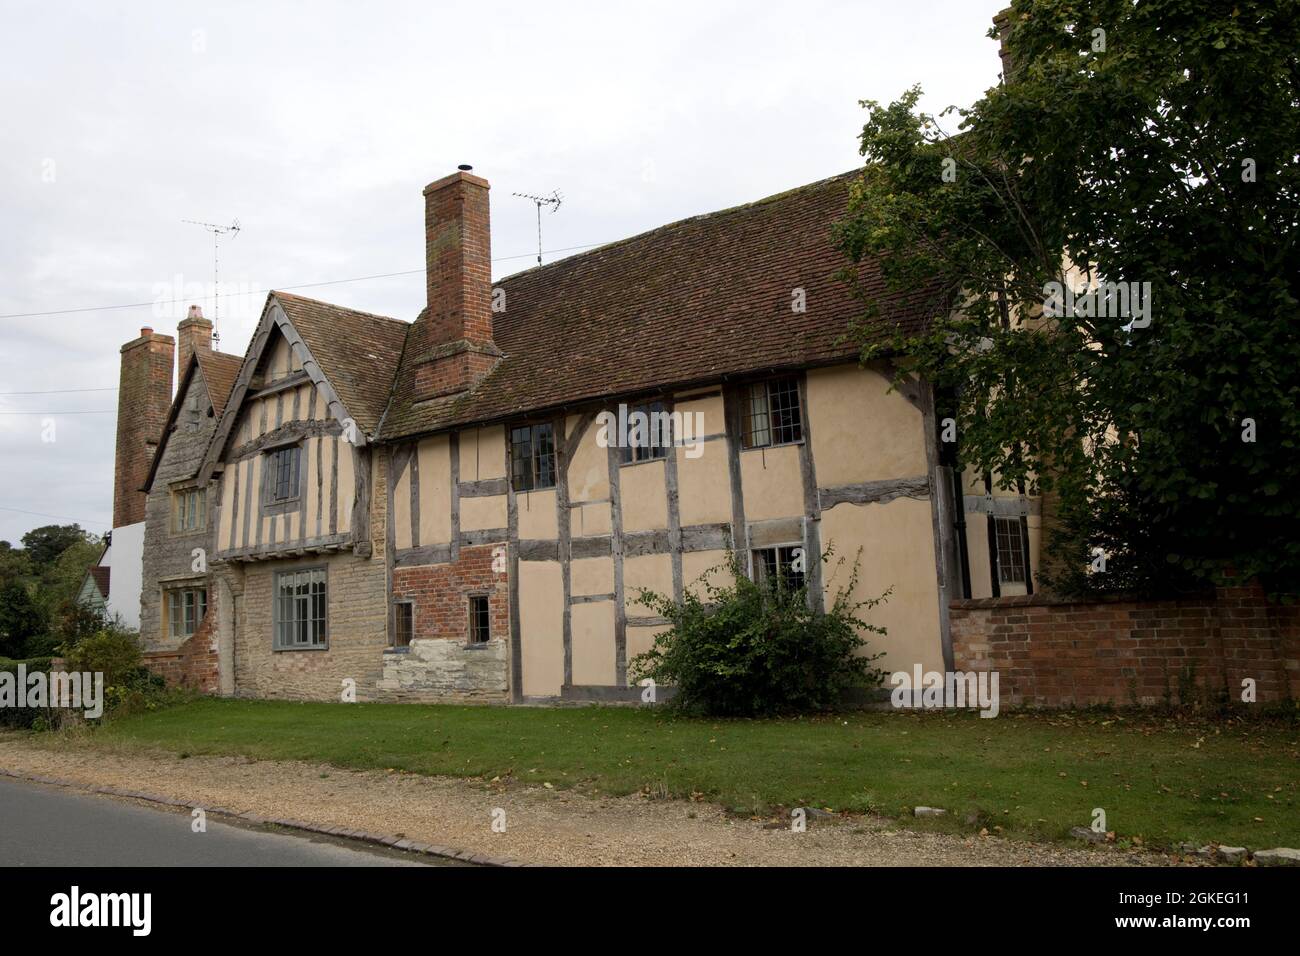 Wisson Hill is a late 16th Centry classic Grade two half-timbered house with tiled roof and two brick chimneys Barton near Bidford on Avon Warwickshir Stock Photo